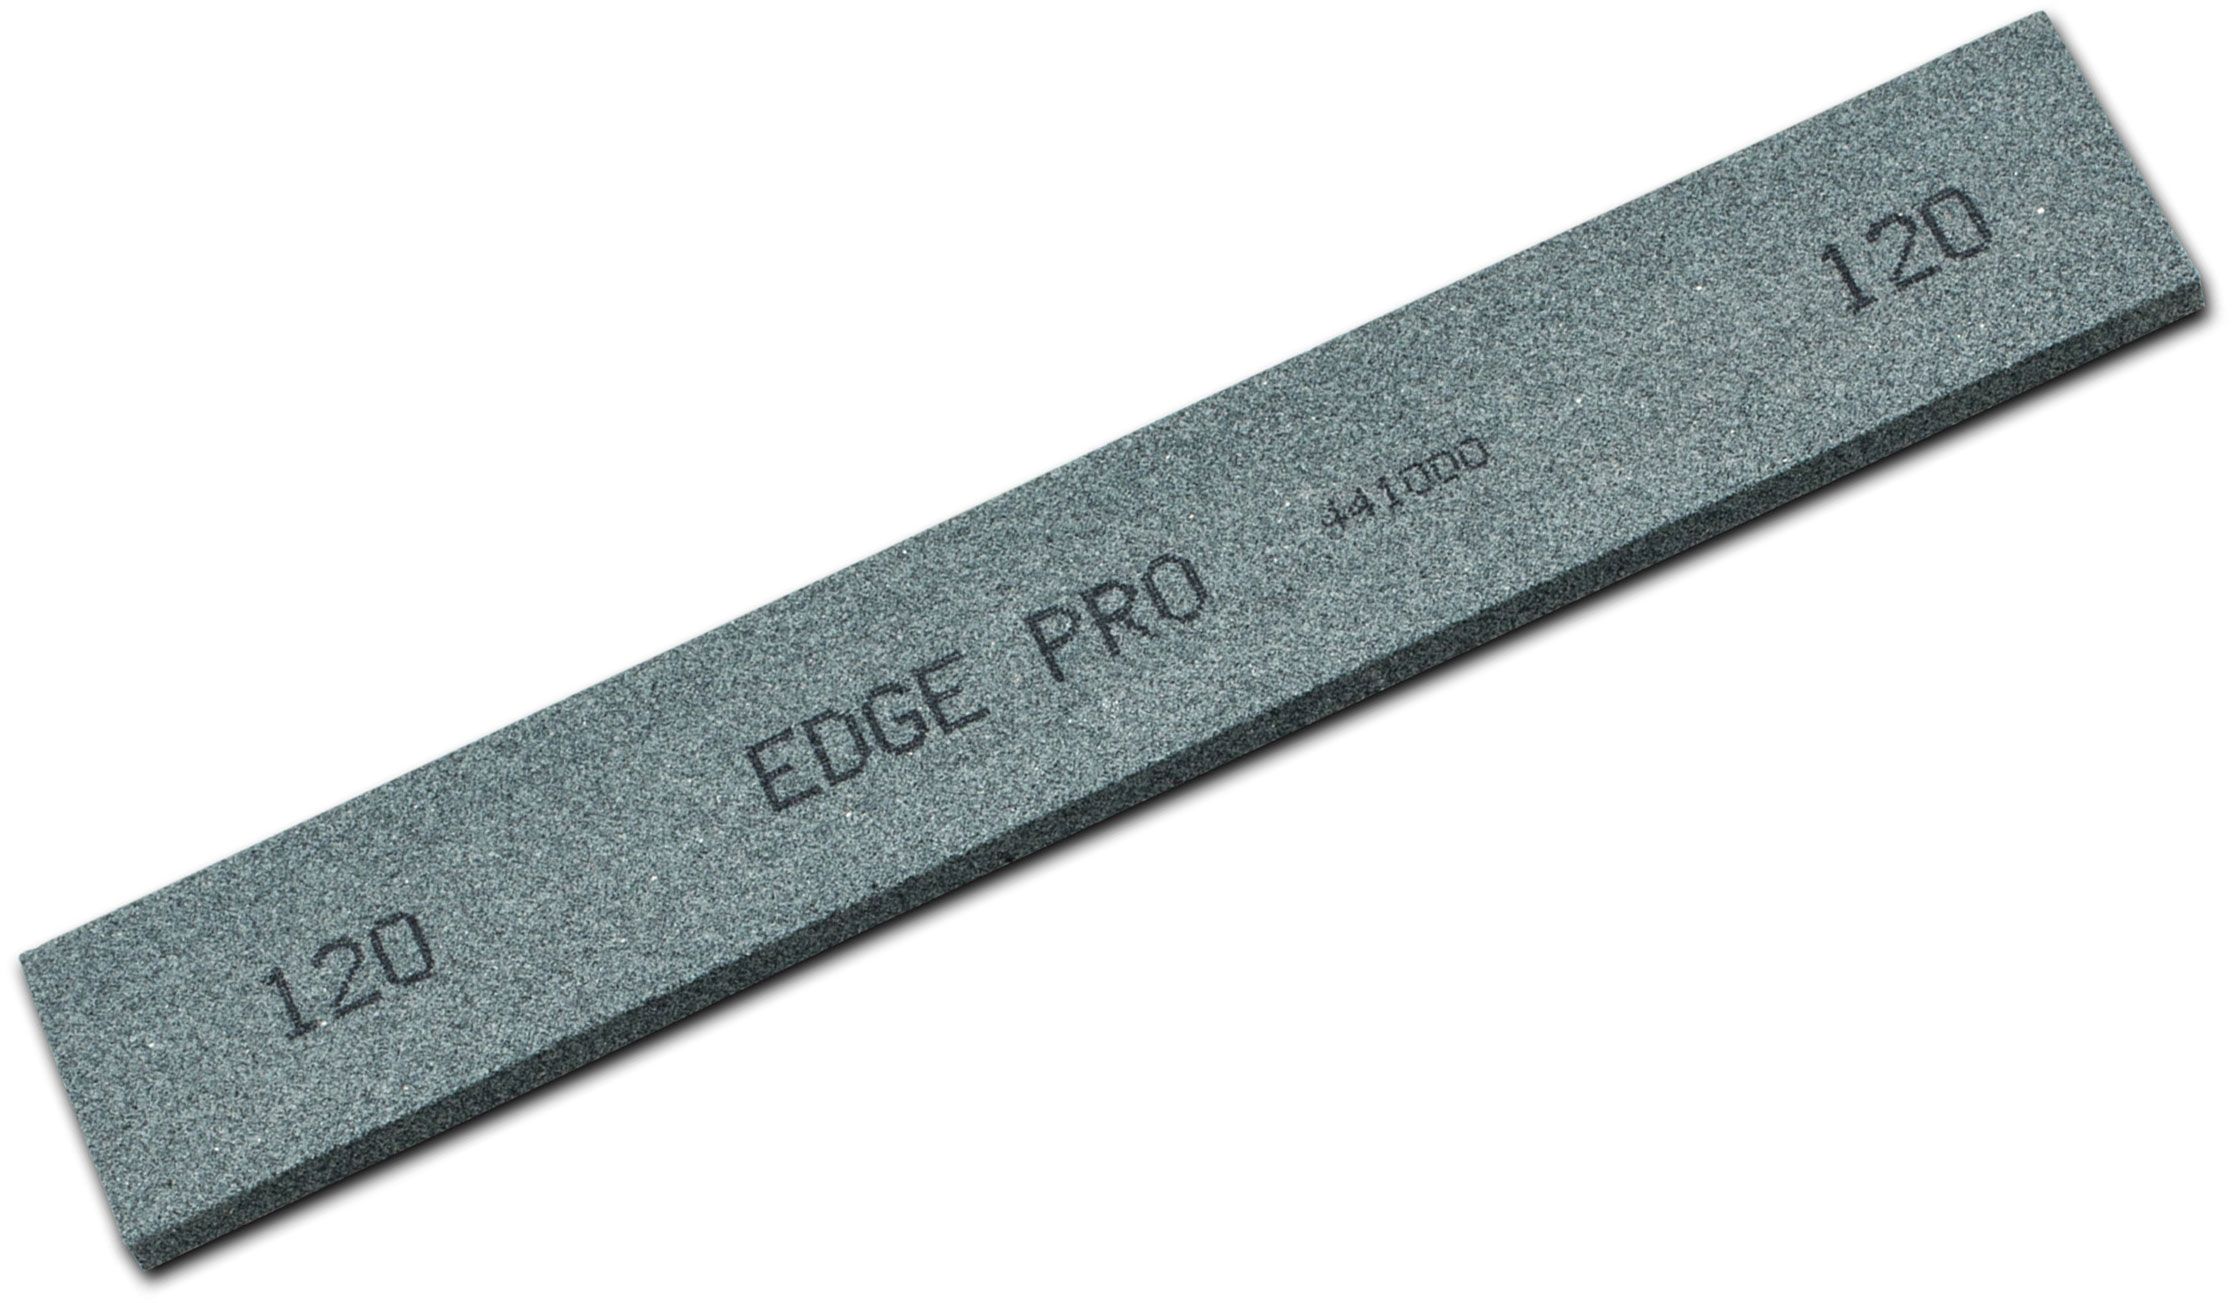 GENUINE EDGE PRO 120-GRIT 1" MOUNTED SHARPENING STONE MADE IN USA BRAND NEW 